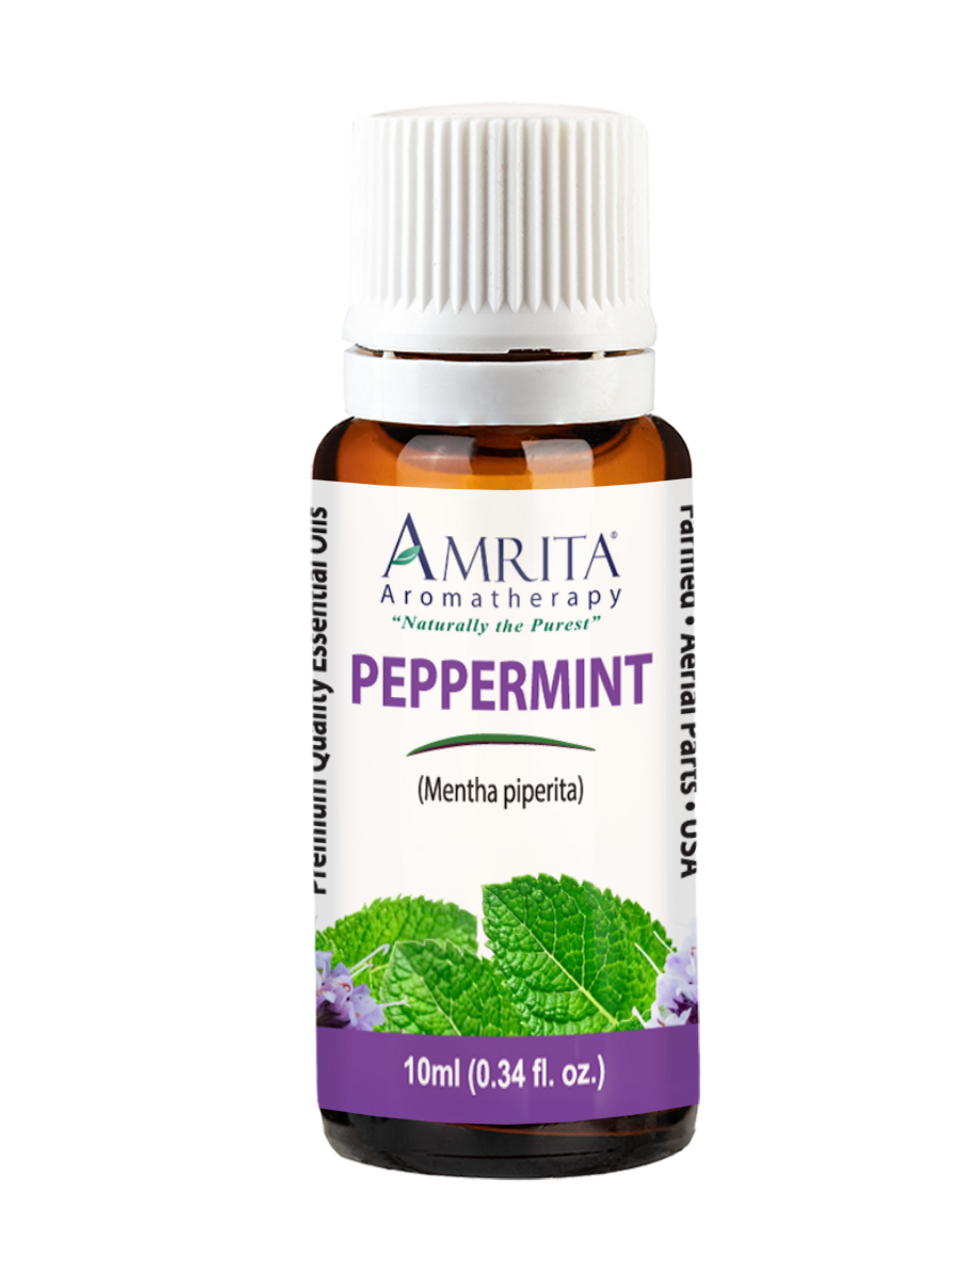 Peppermint Essential Oil, Peppermint Essential Oils For Aromatherapy